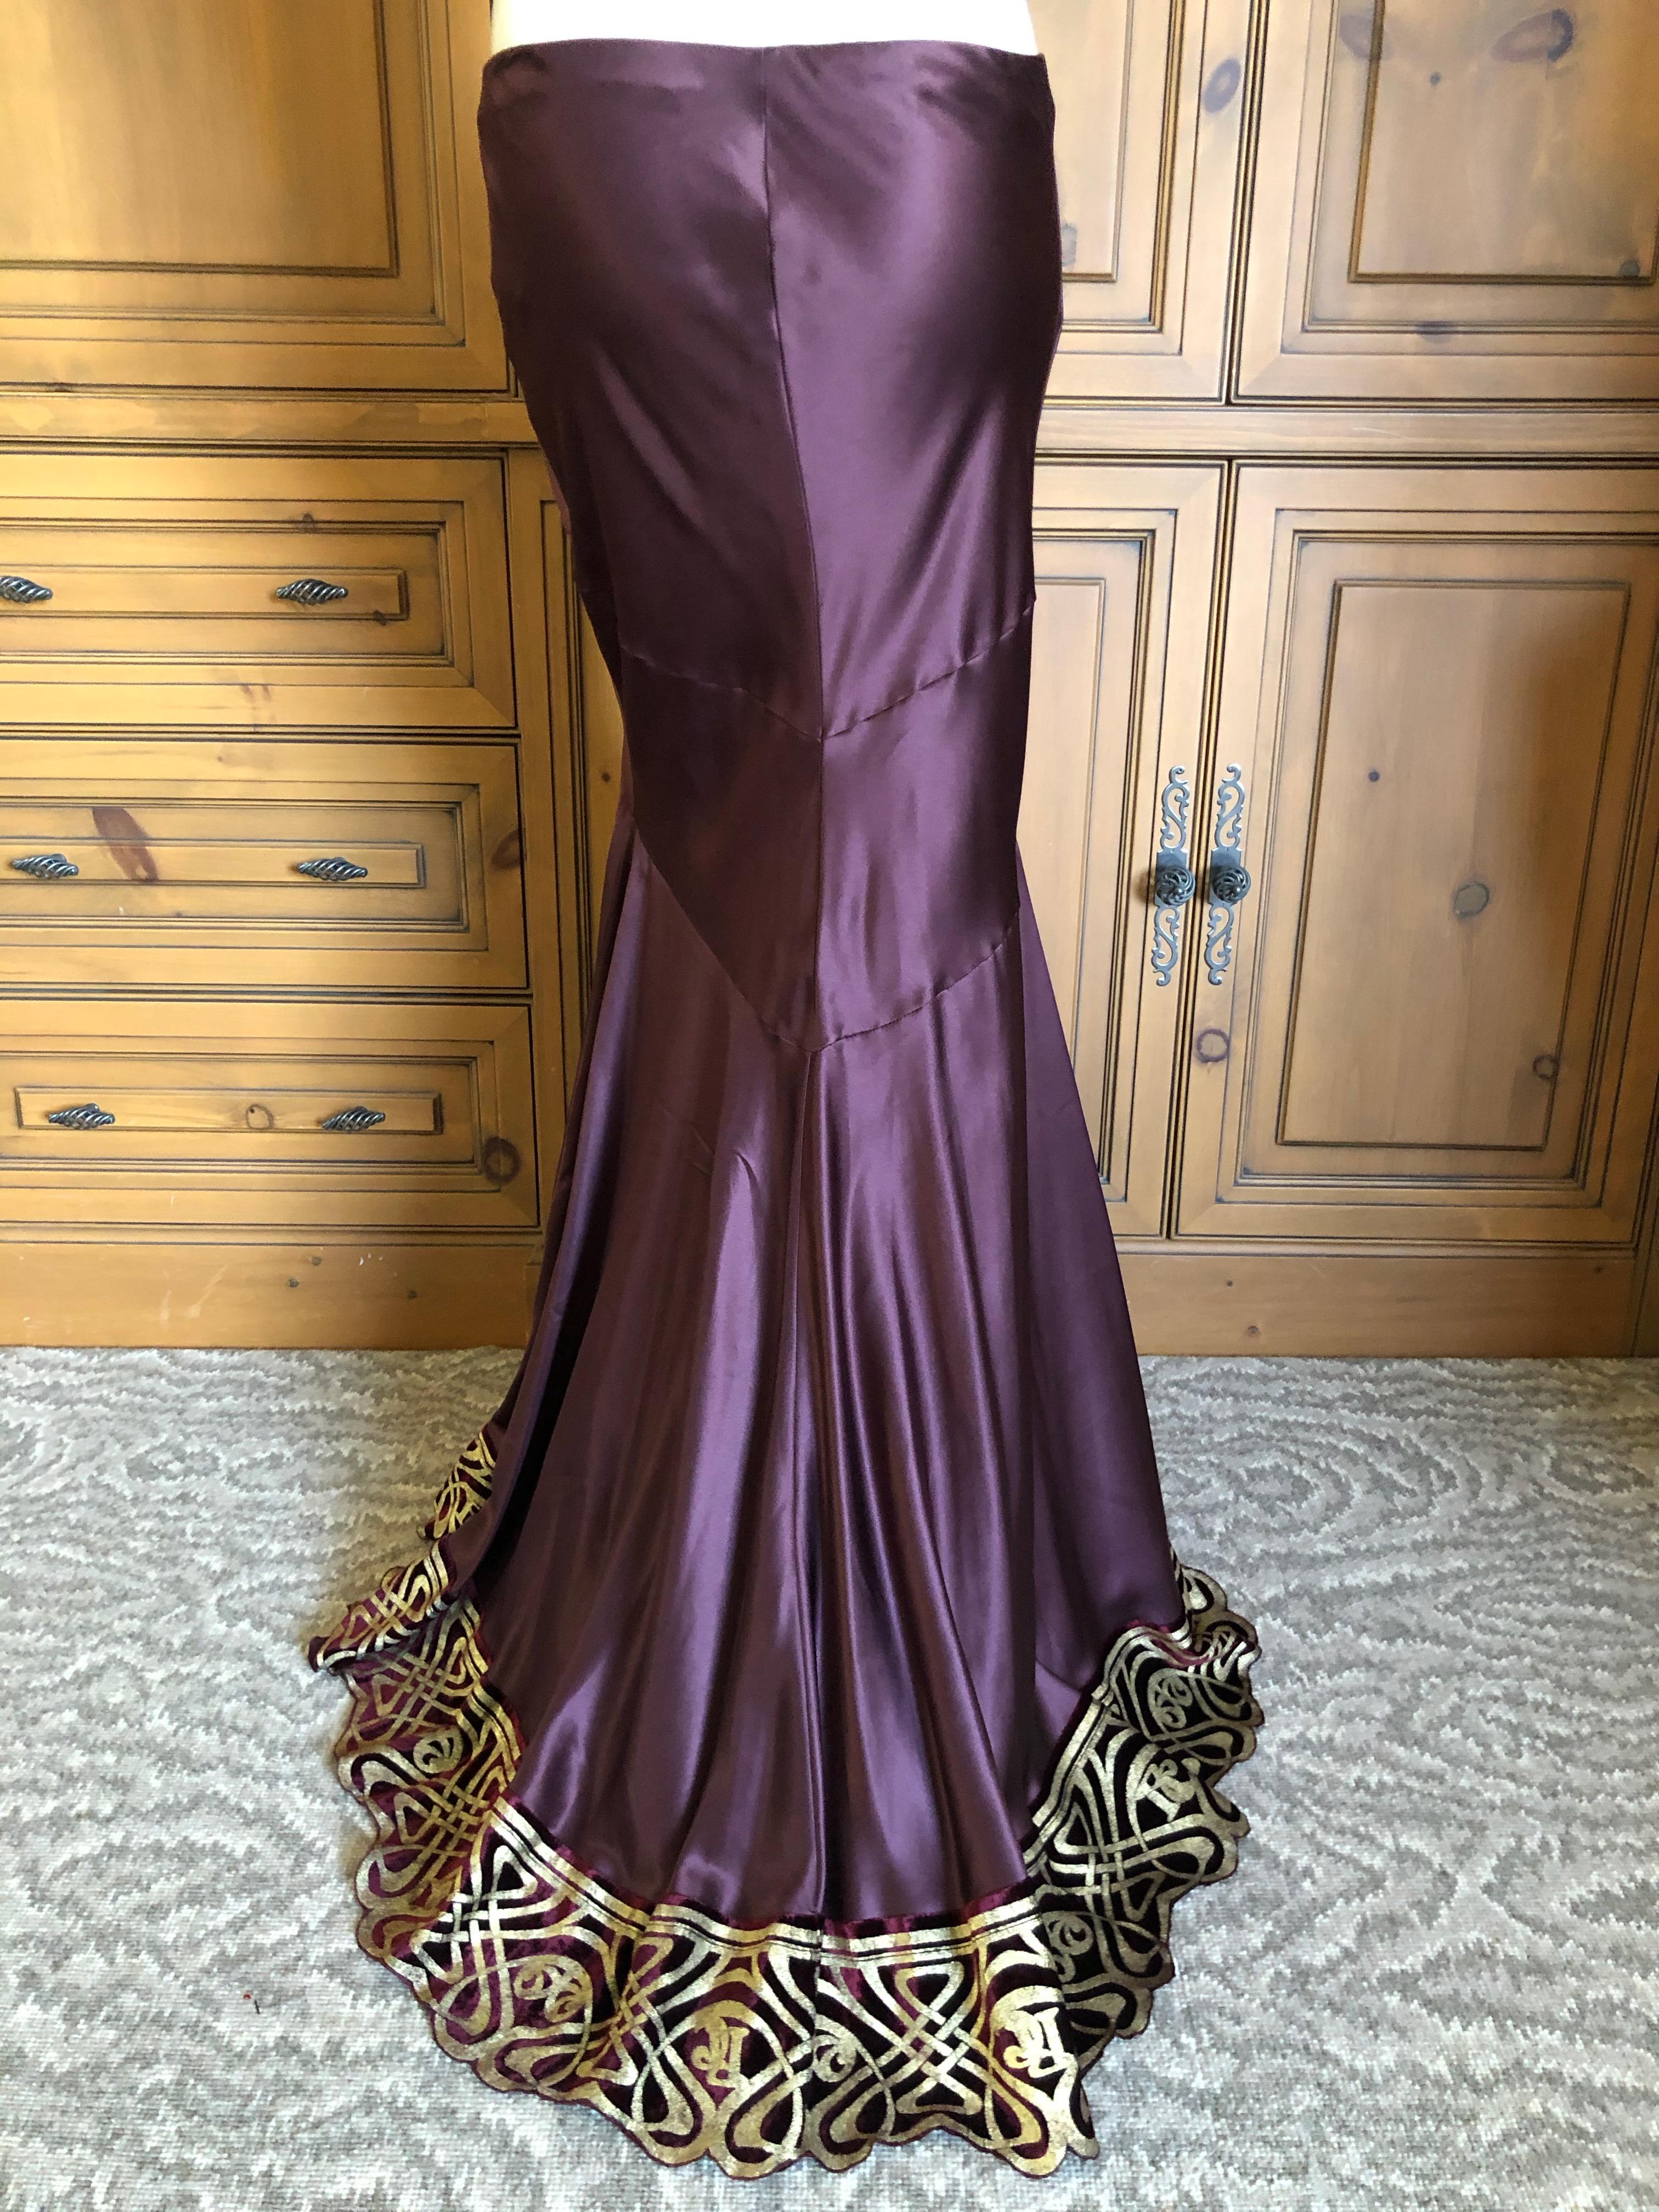 Roberto Cavalli Burgundy Vintage Silk Ball Skirt with Fortuny Pattern Gold Hem In Excellent Condition For Sale In Cloverdale, CA